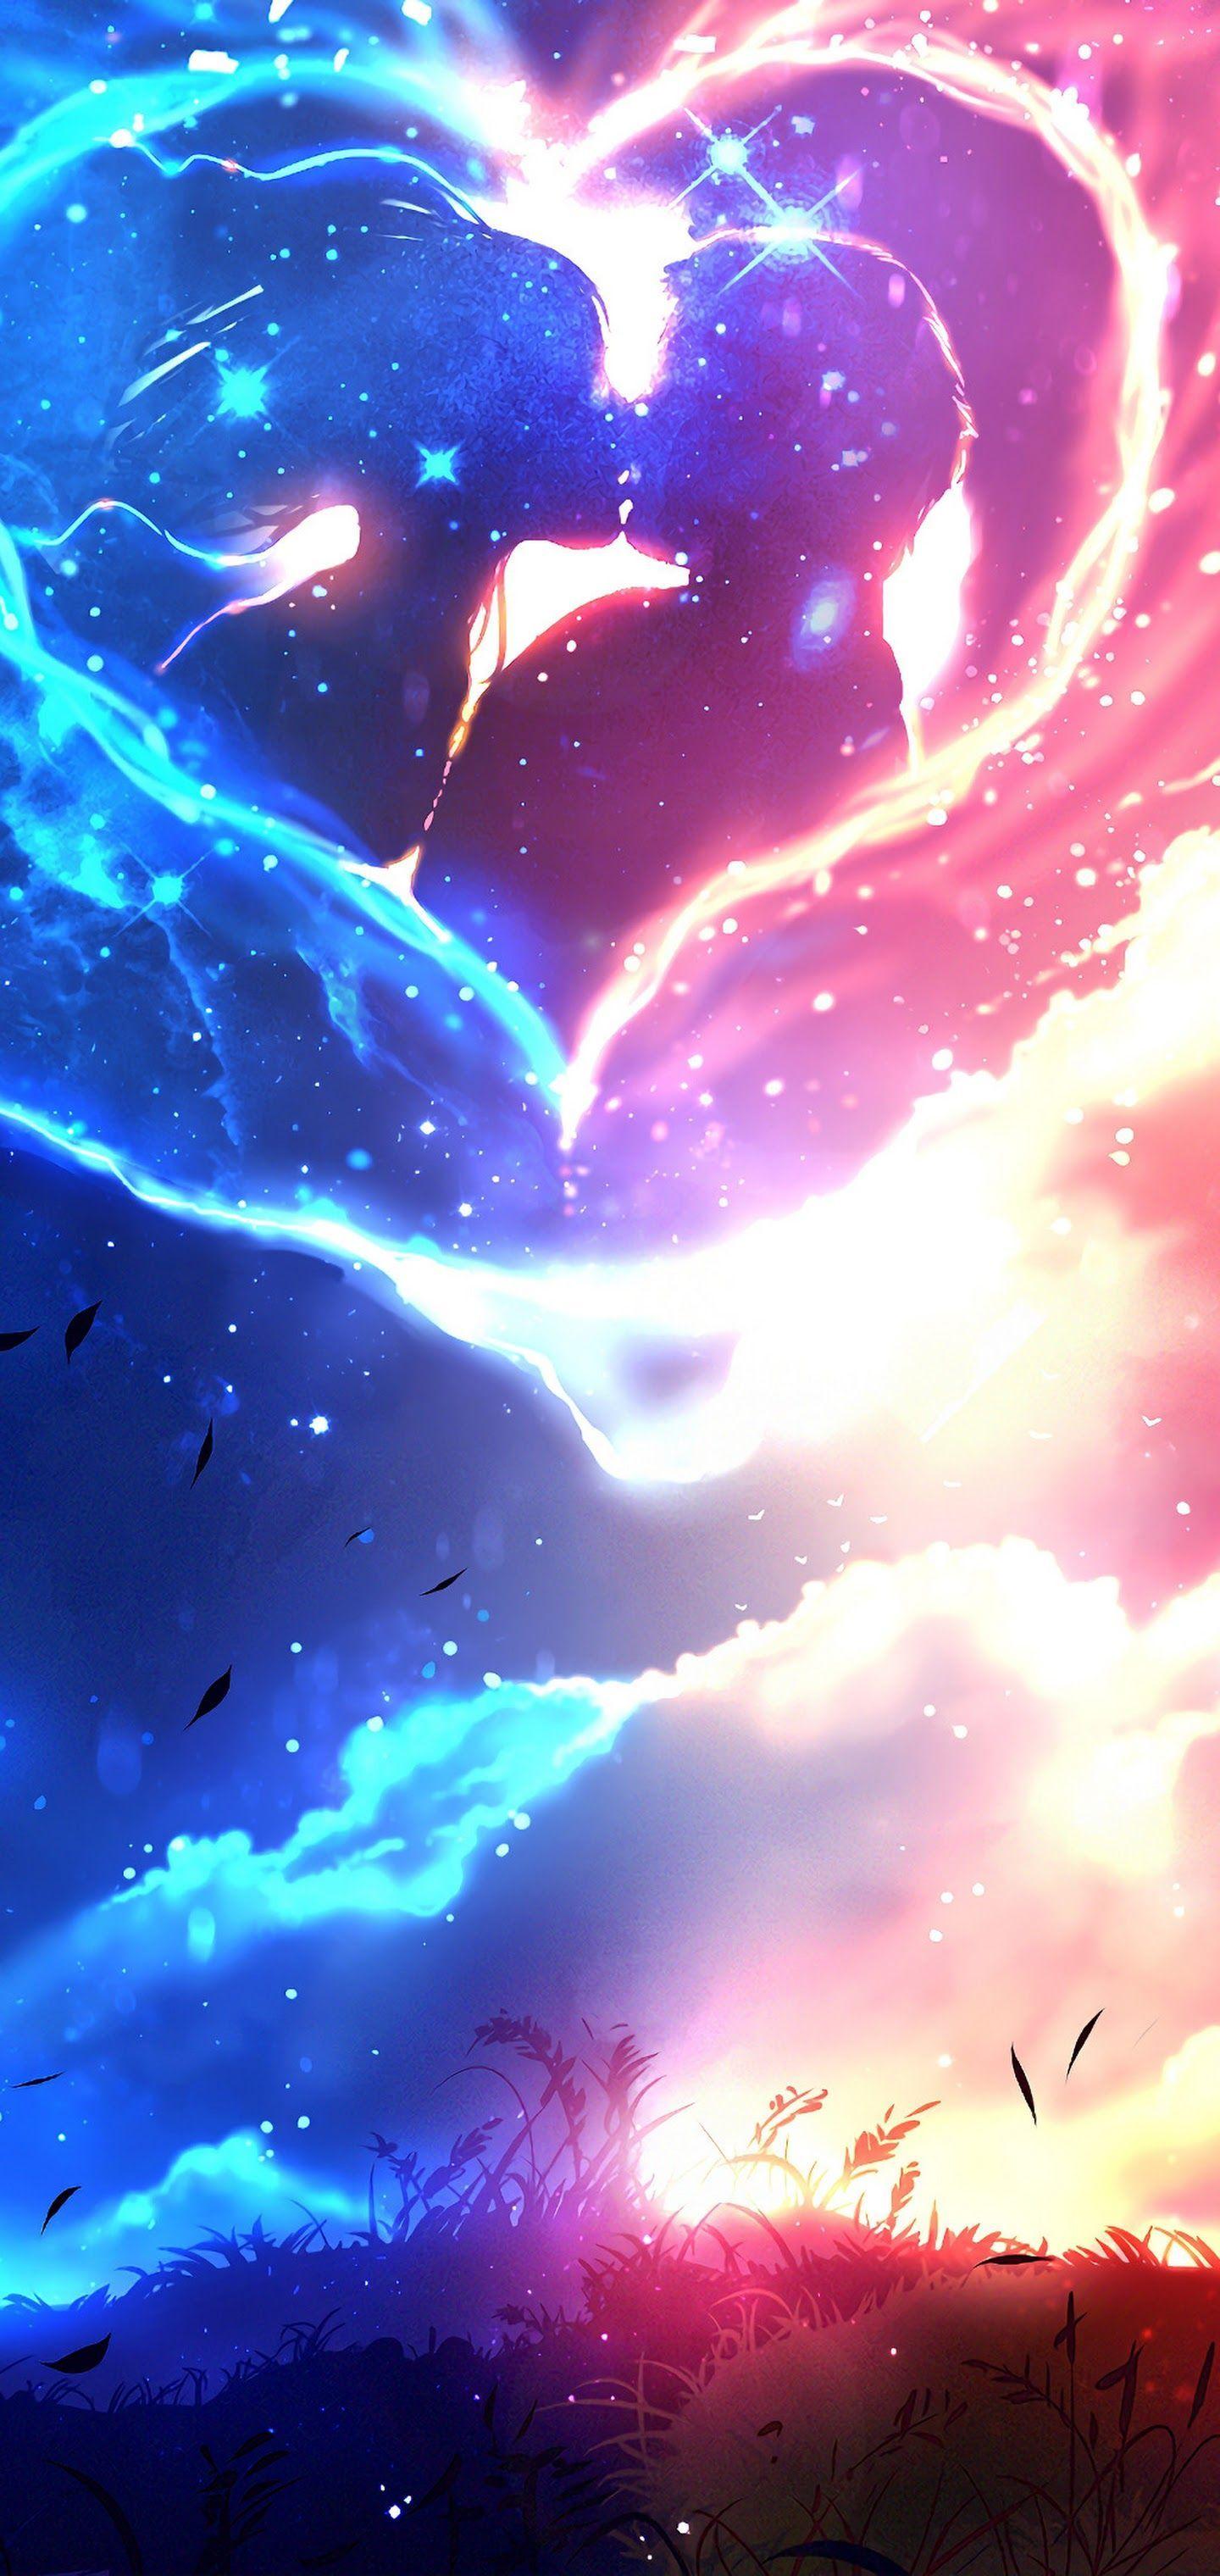 Galaxy Anime 4K Wallpapers - Top Free Galaxy Anime 4K Backgrounds